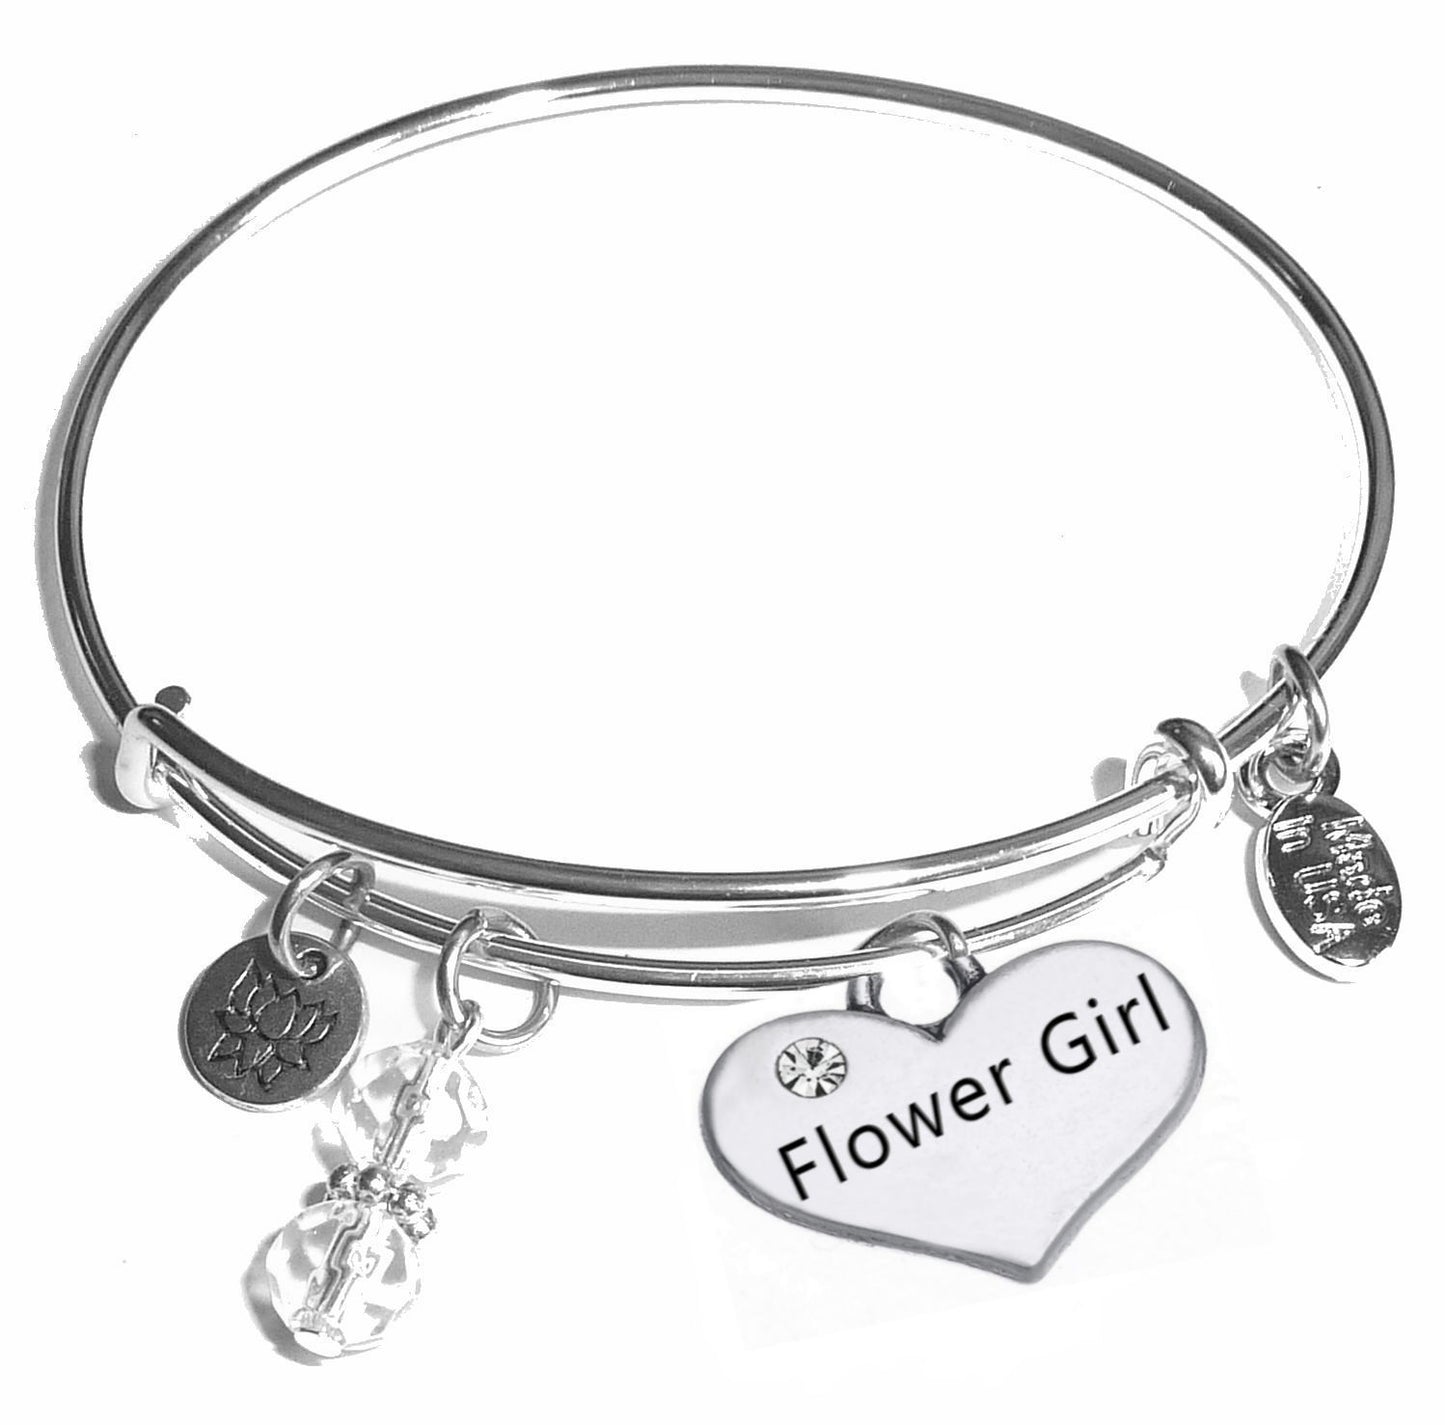 Flower Girl - Message Bangle Bracelet - Expandable Wire Bracelet– Comes in a gift box